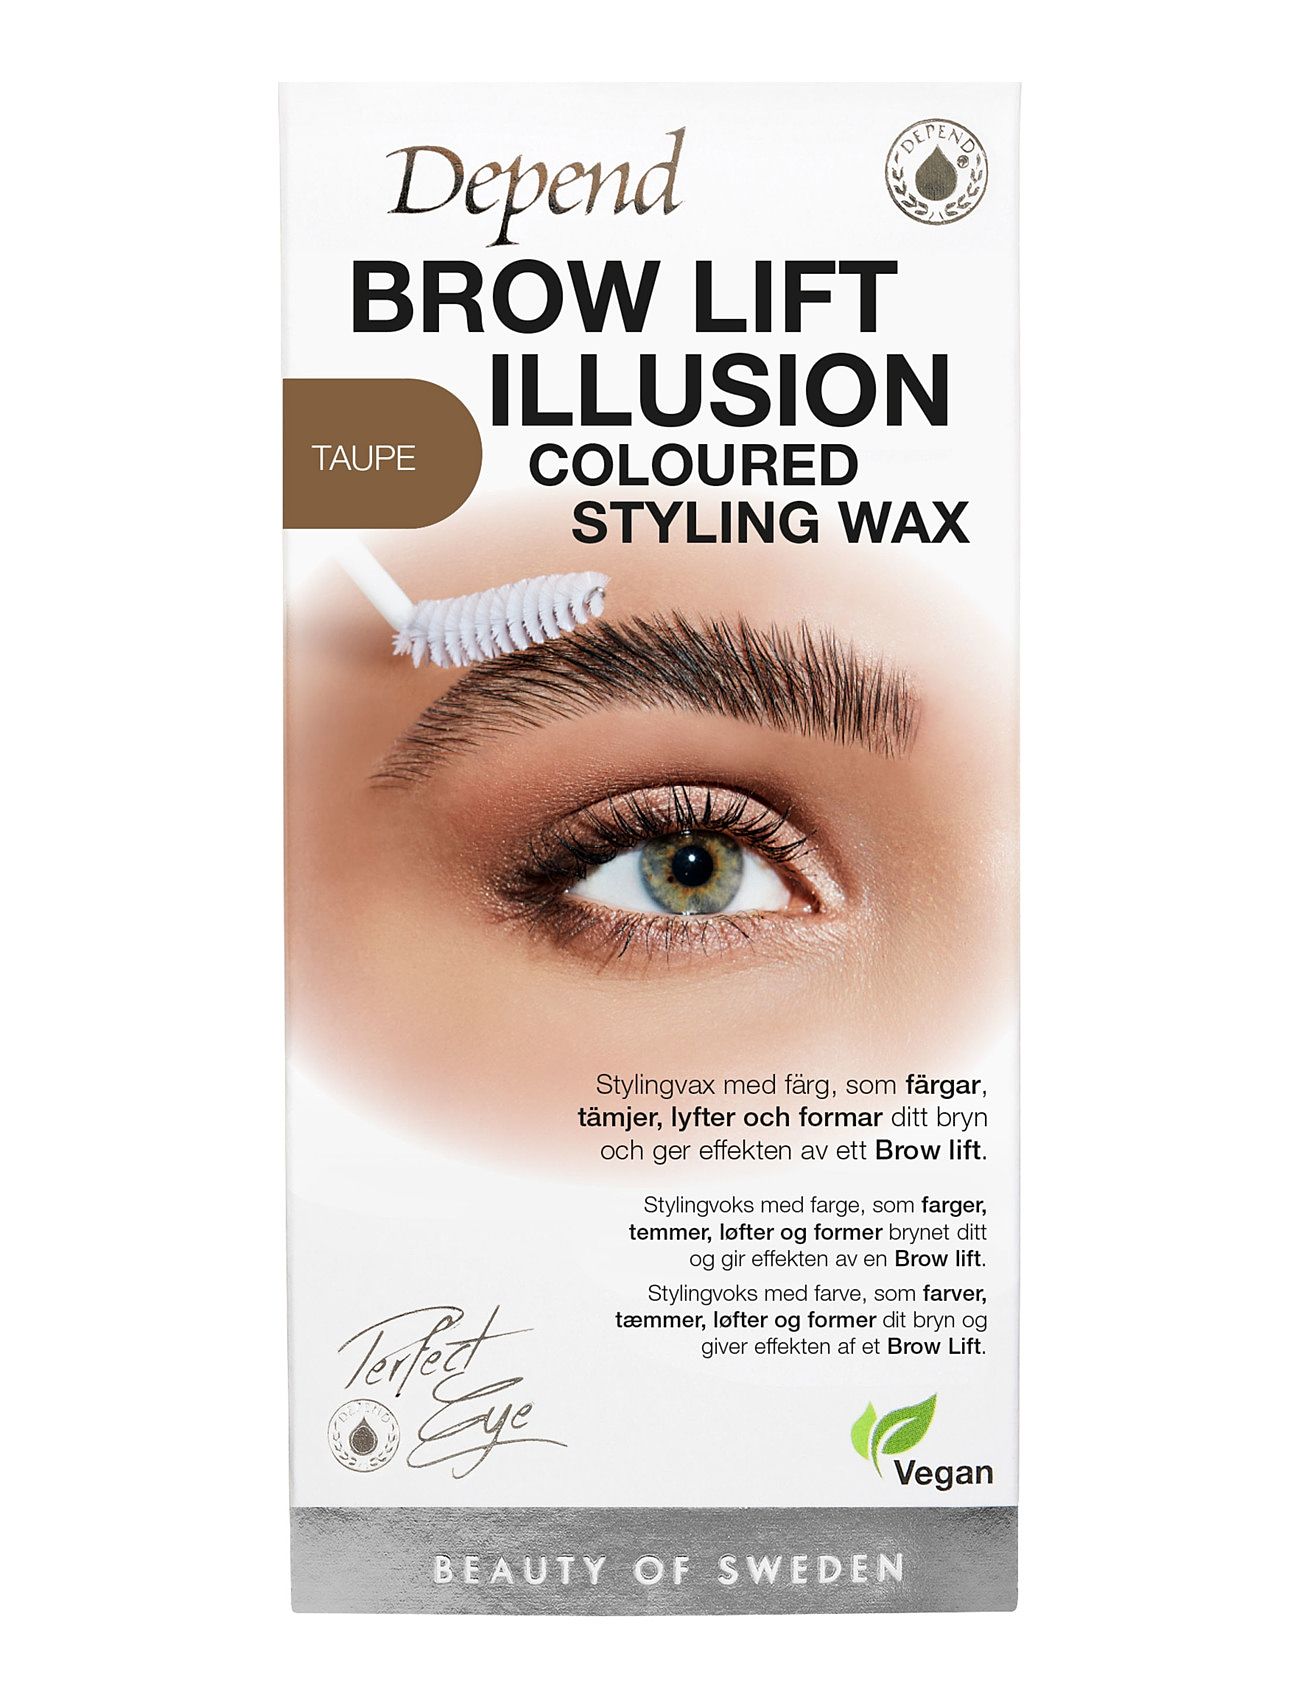 Pe Brow Illusion Wax Taupe Se/No/Dk Beauty Women Makeup Eyes Eyebrows Eyebrow Pomade Nude Depend Cosmetic